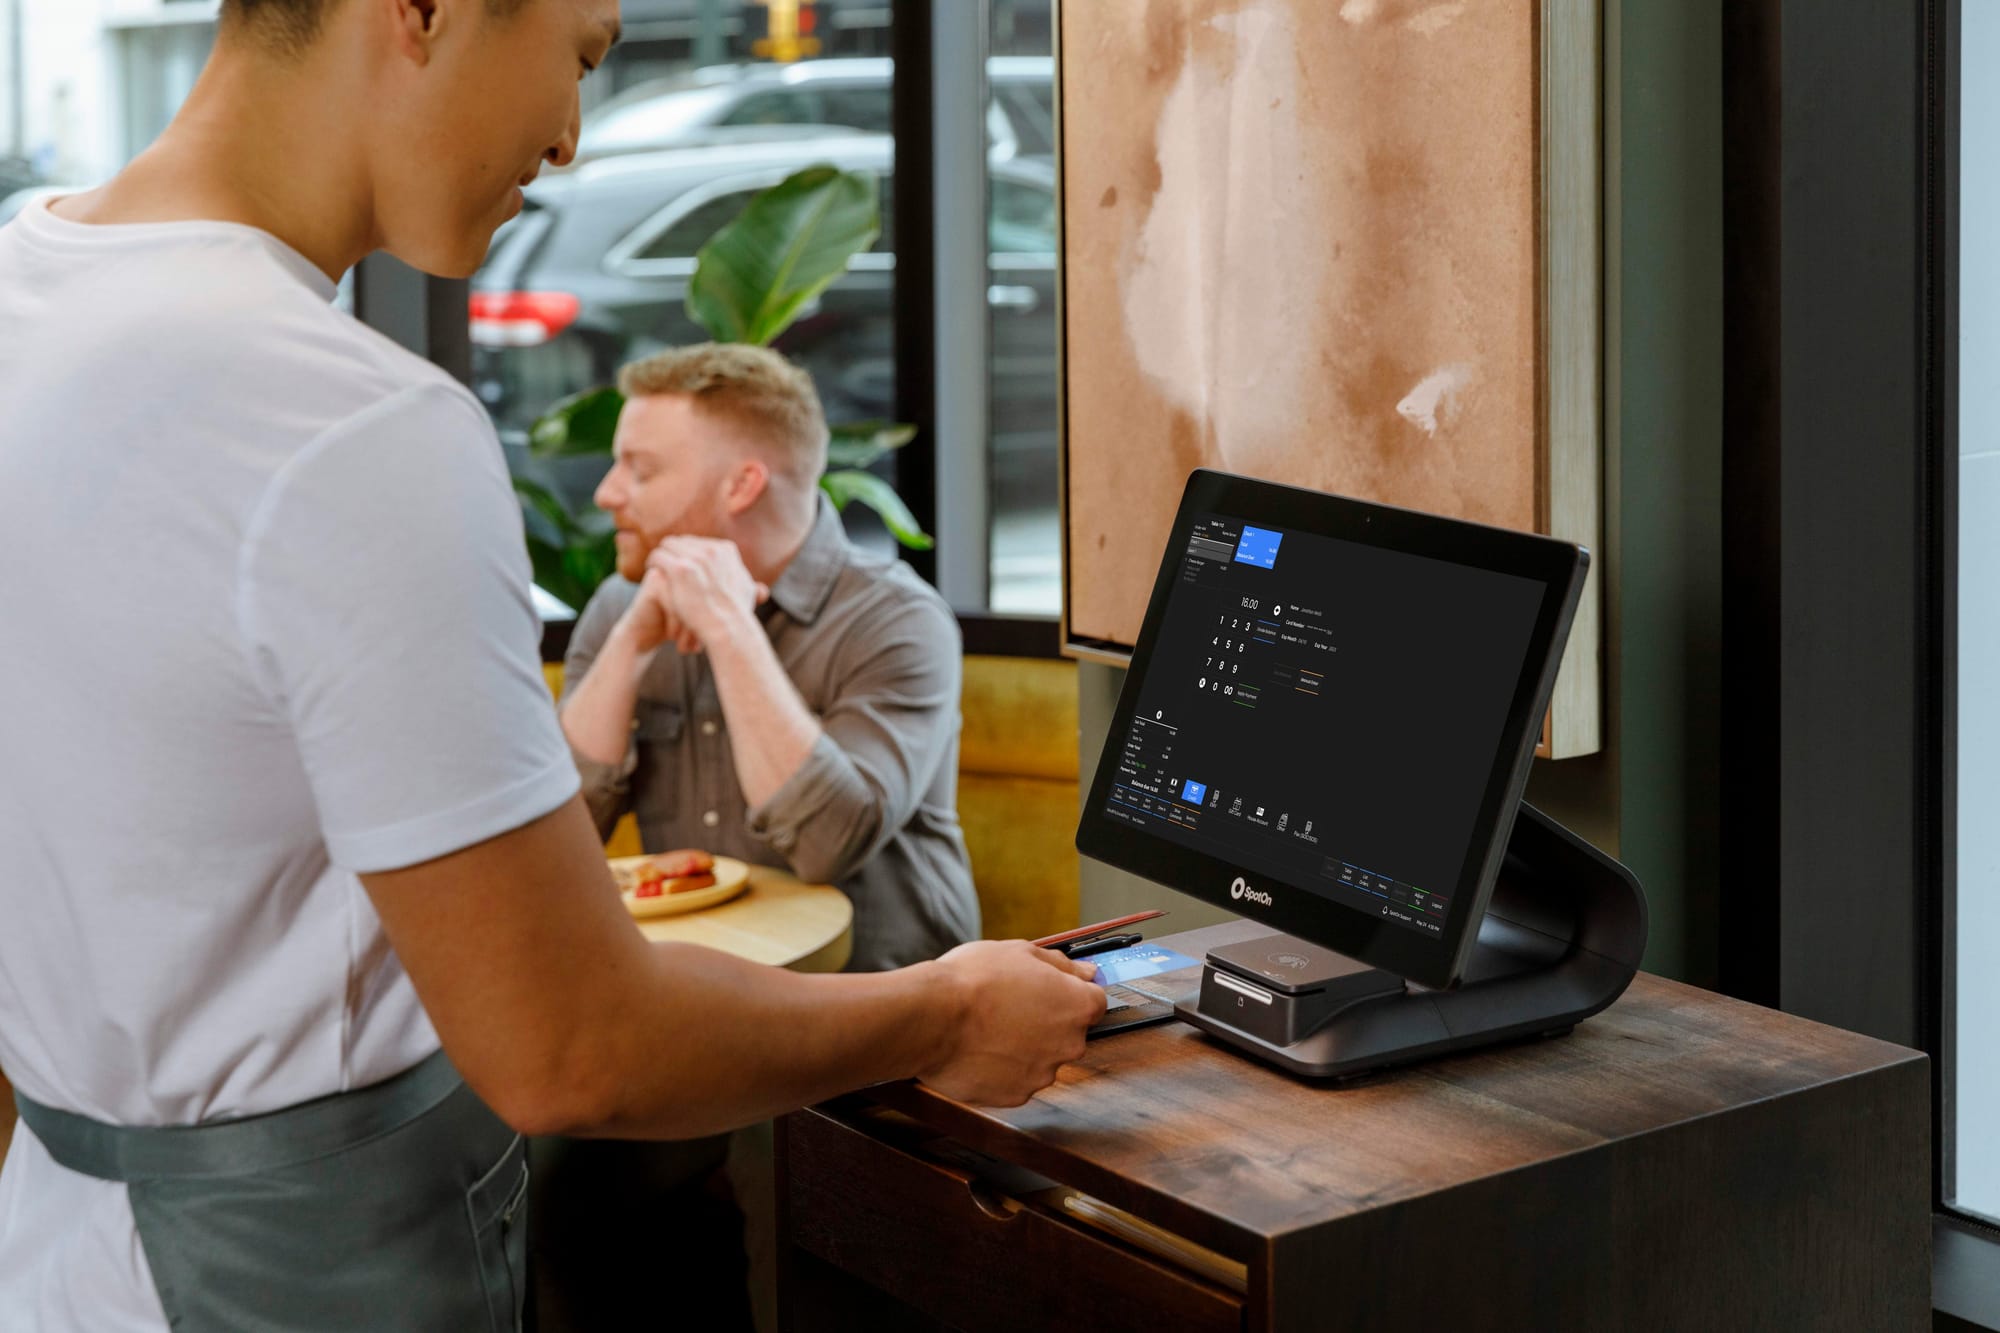 Server taking a payment on the SpotOn Restaurant POS.